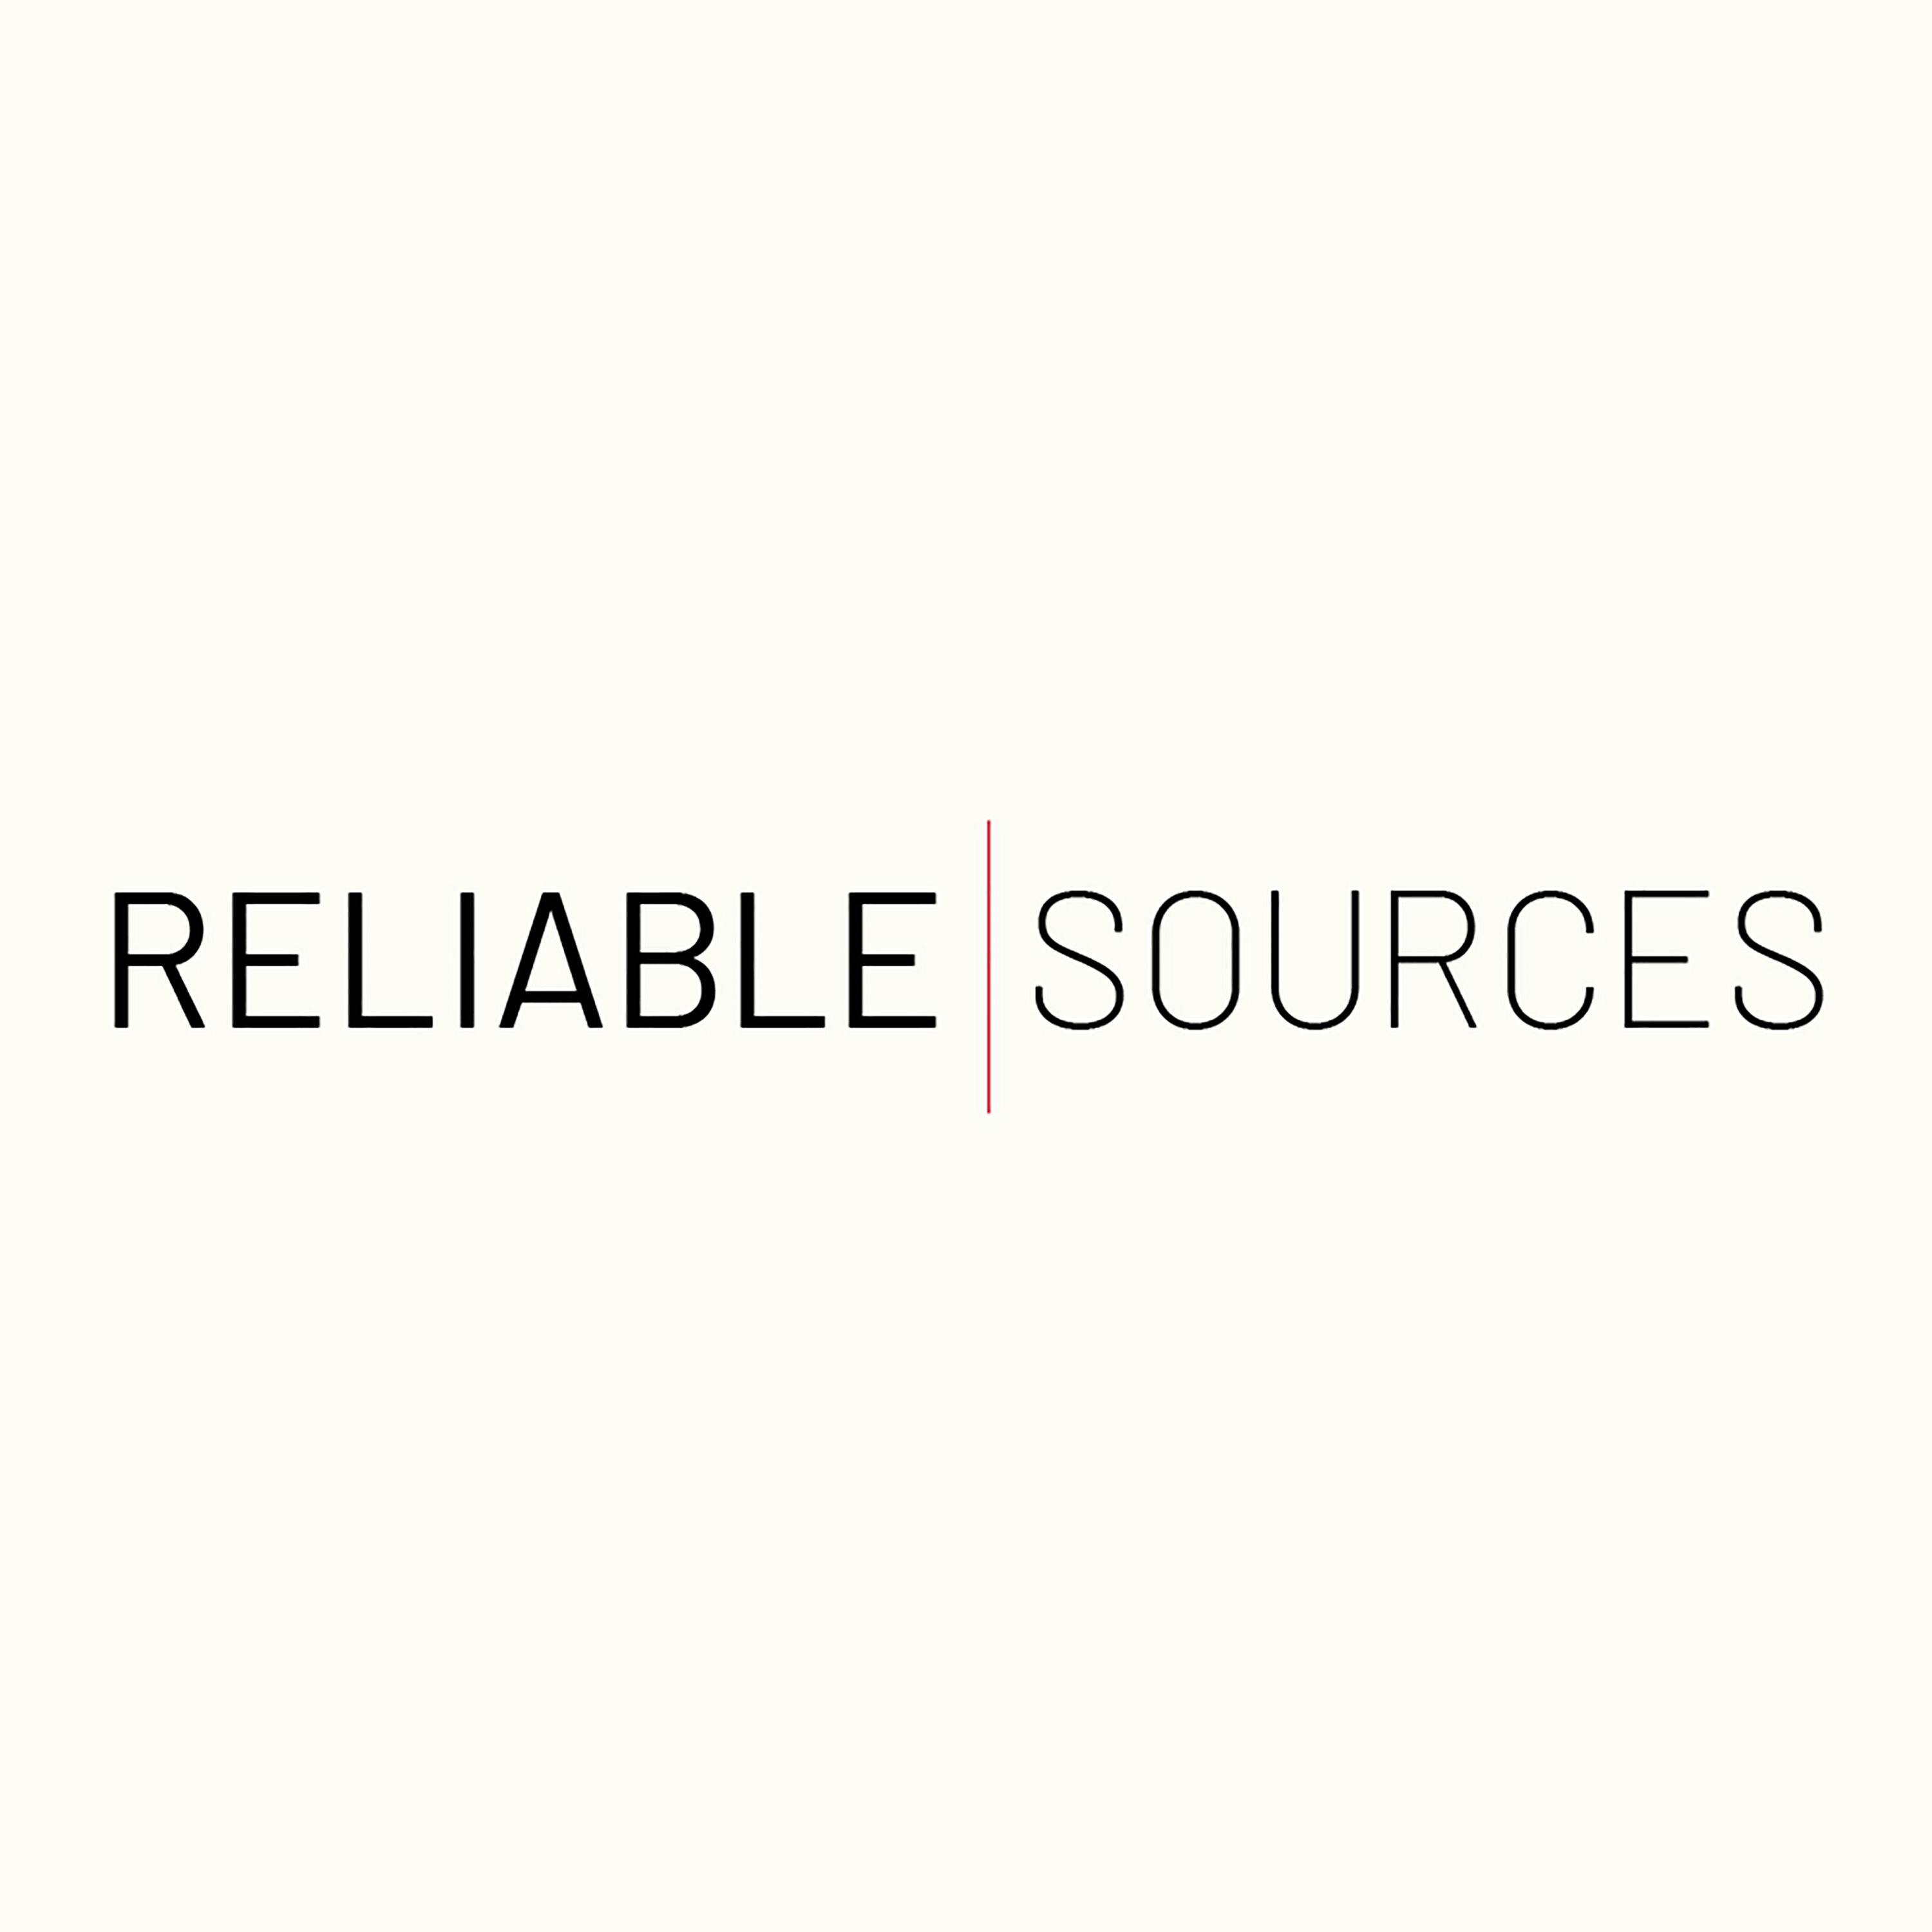 Media leaders convene for final episode of ’Reliable Sources’ TV show